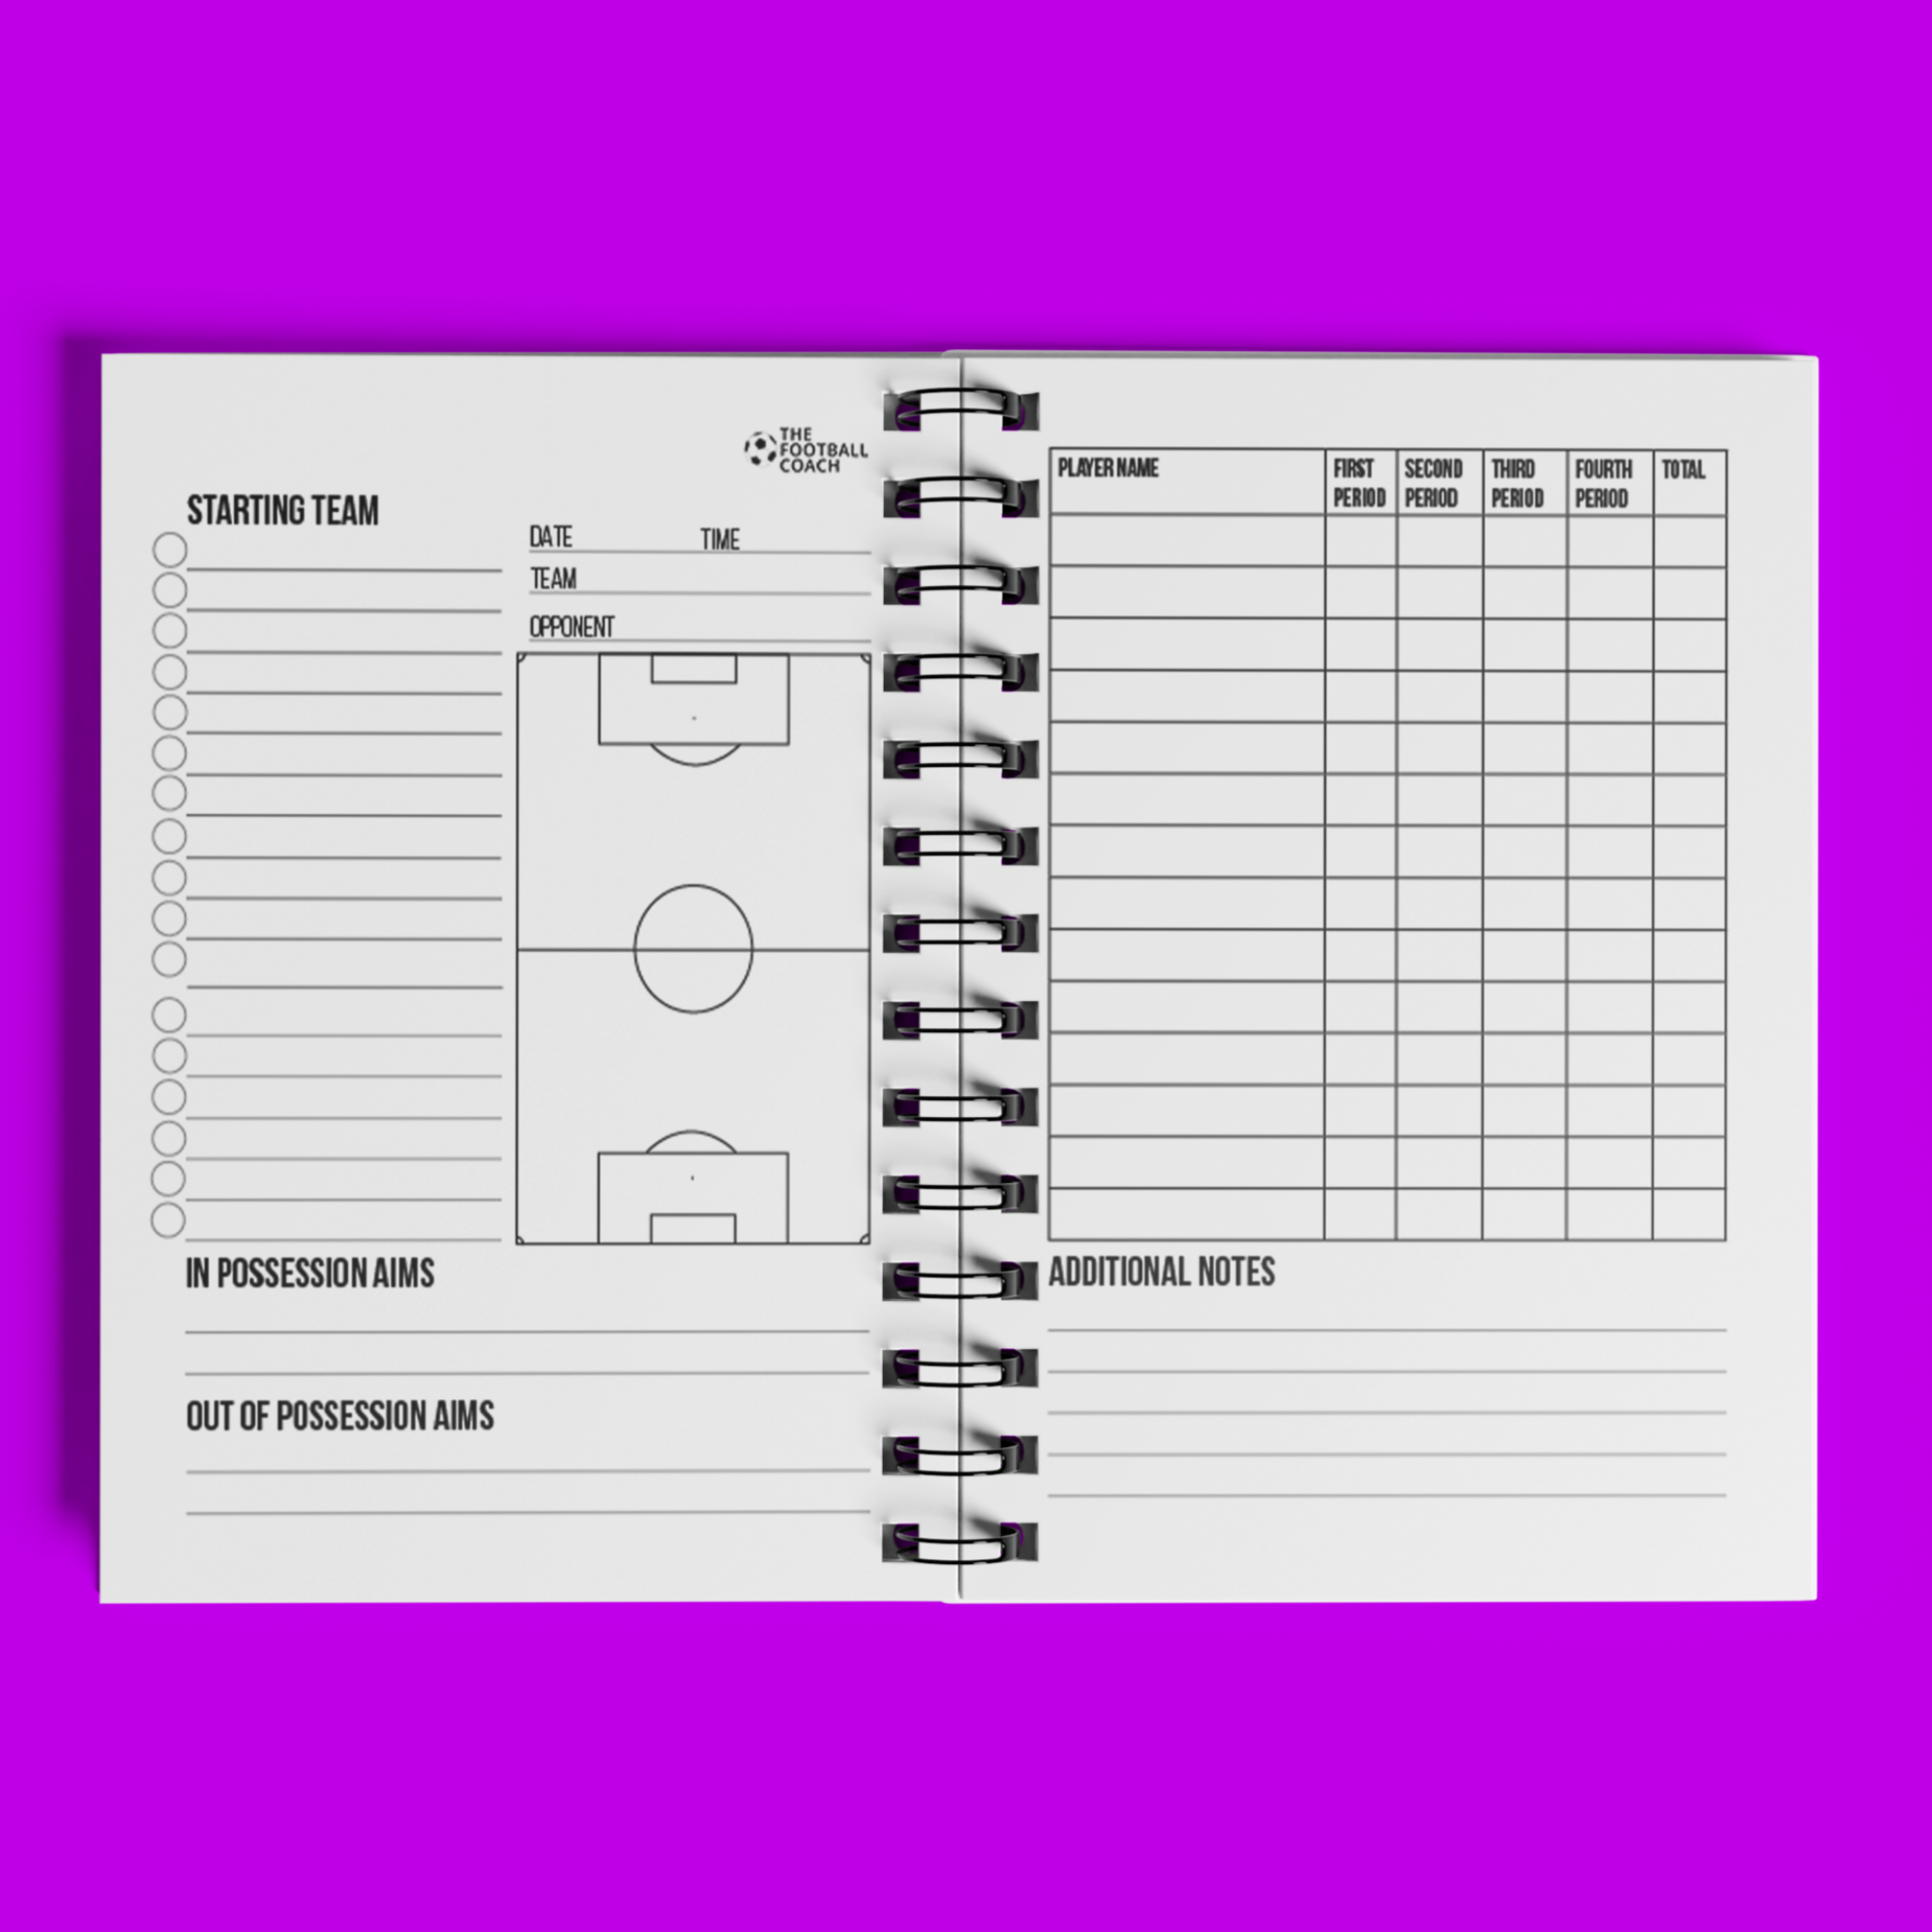 A4 Match-day Notepad